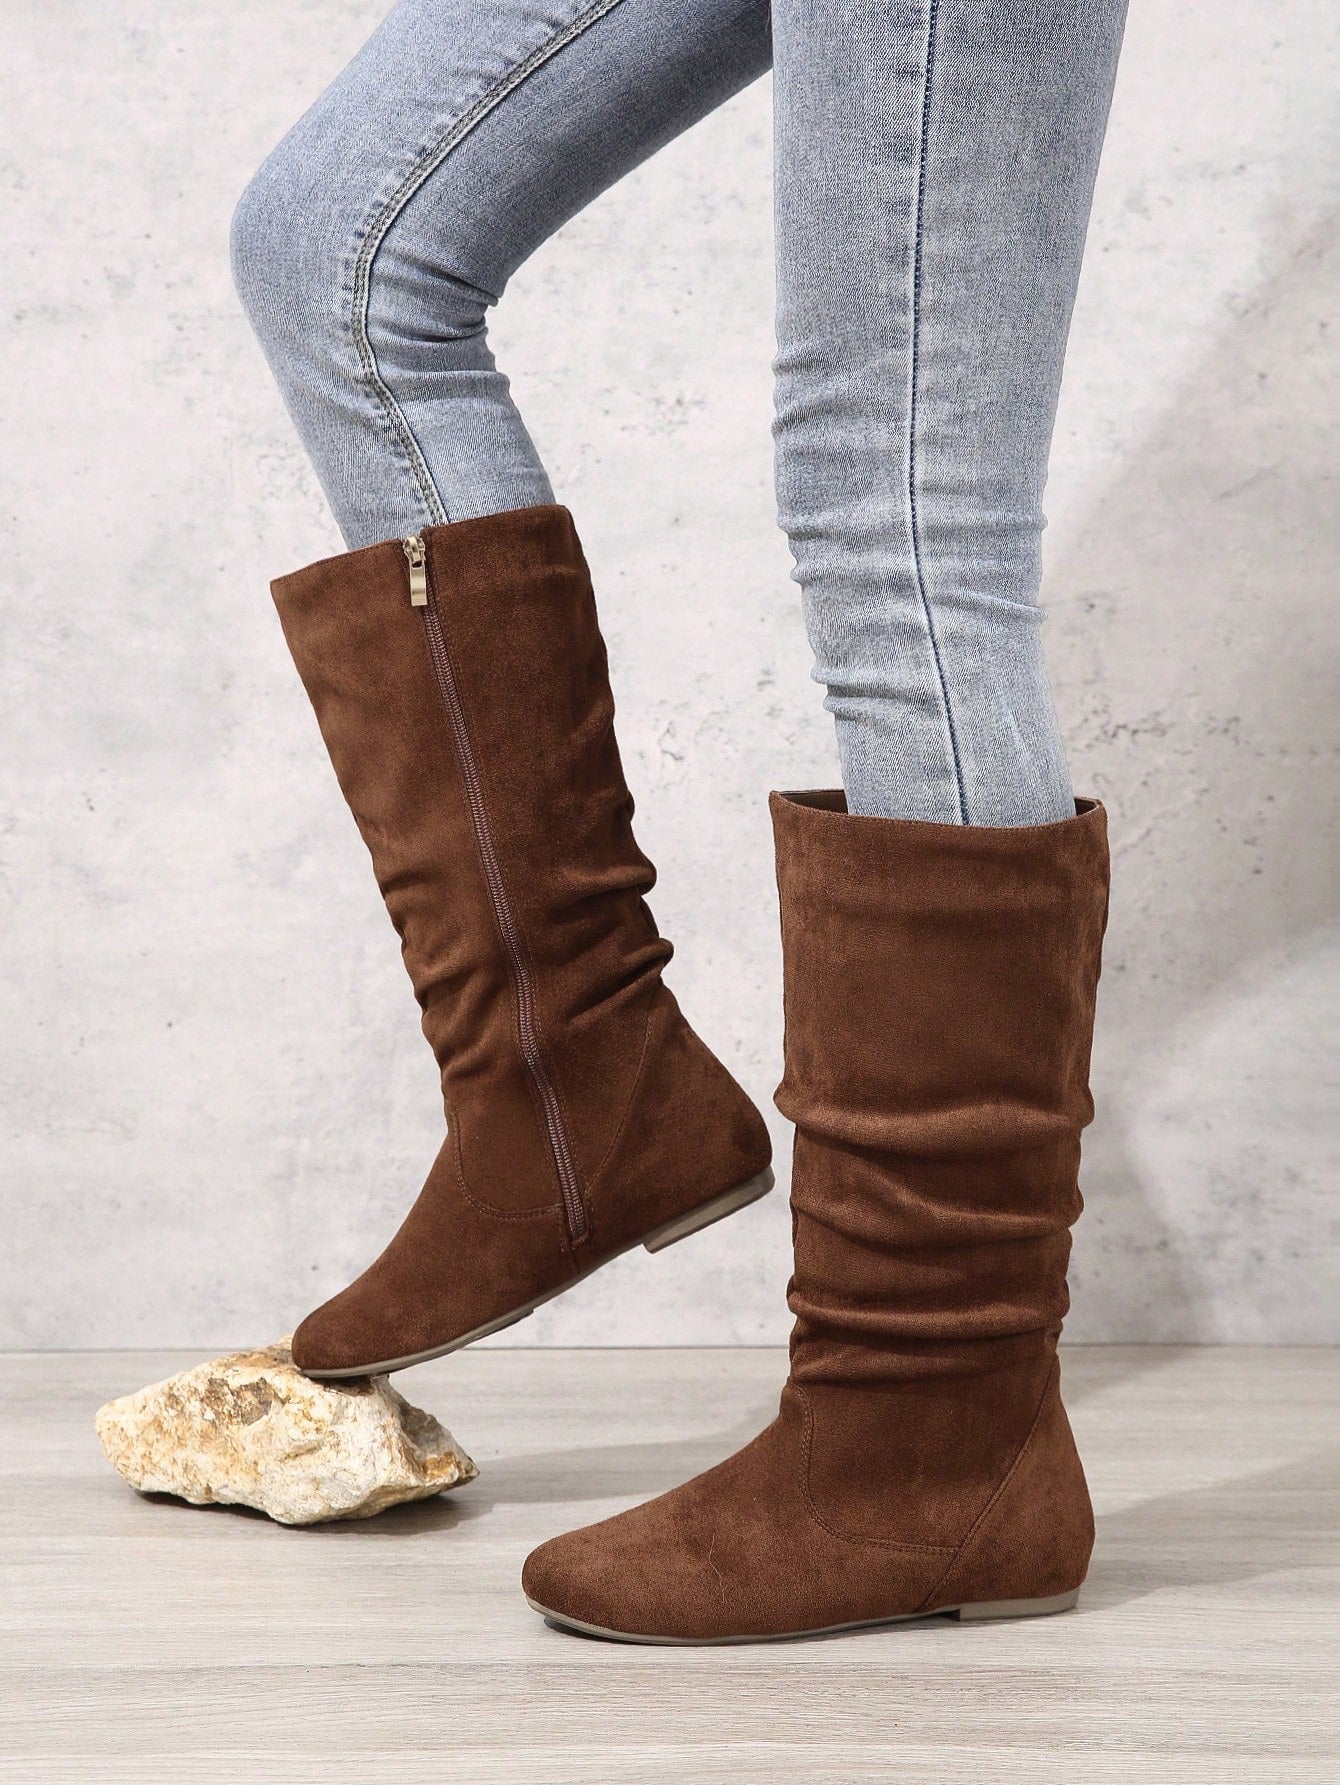 Pink Casual And Comfortable Side Zipper Round Toe Camel Pleated Fashionable Flat Women's Boots